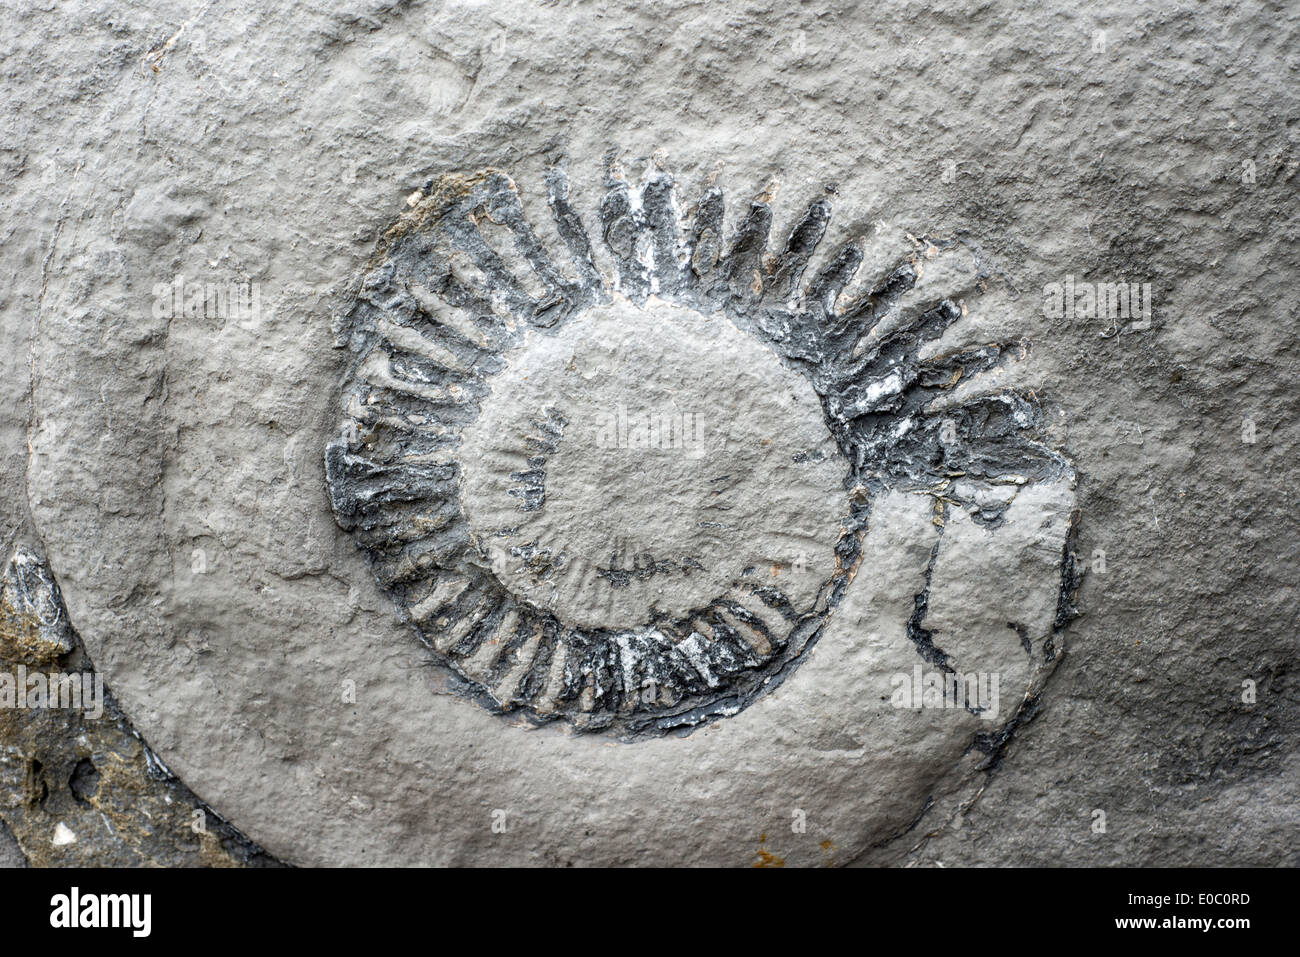 Ammonite fossil in a rock on the beach at Lyme Regis, Dorset, England, UK Stock Photo